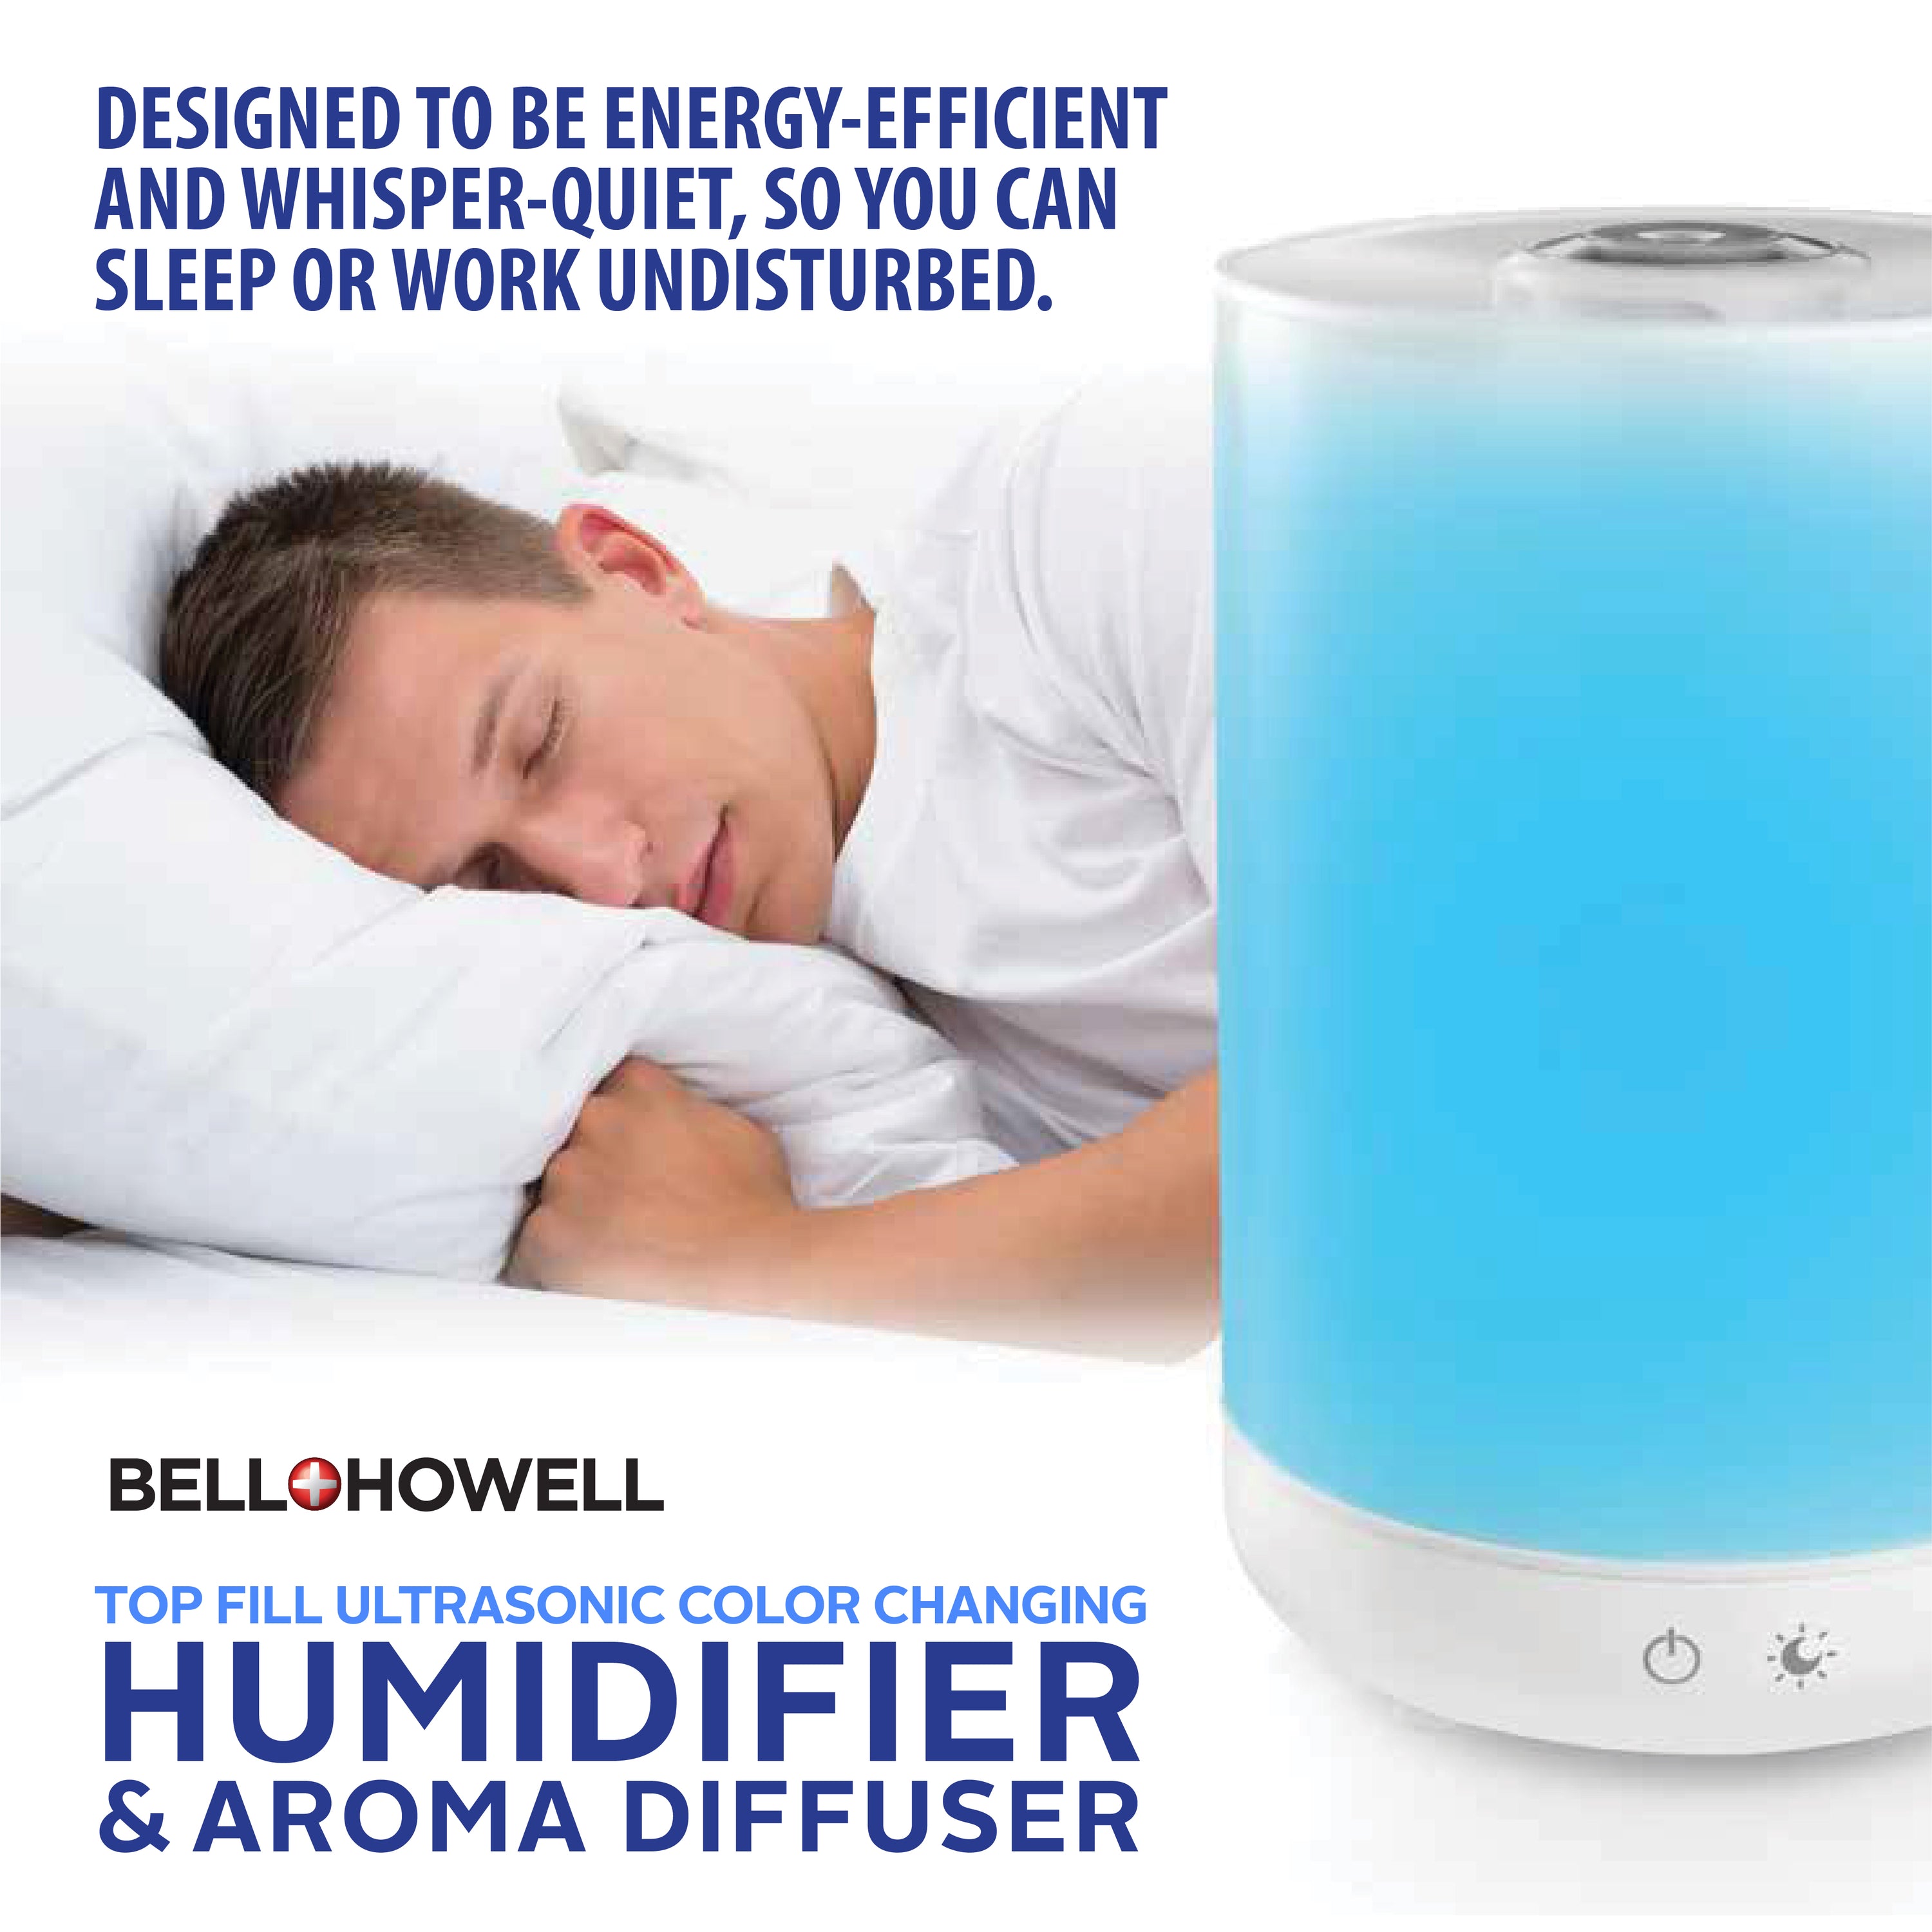 Bell + Howell Top Fill Color Changing Humidifier